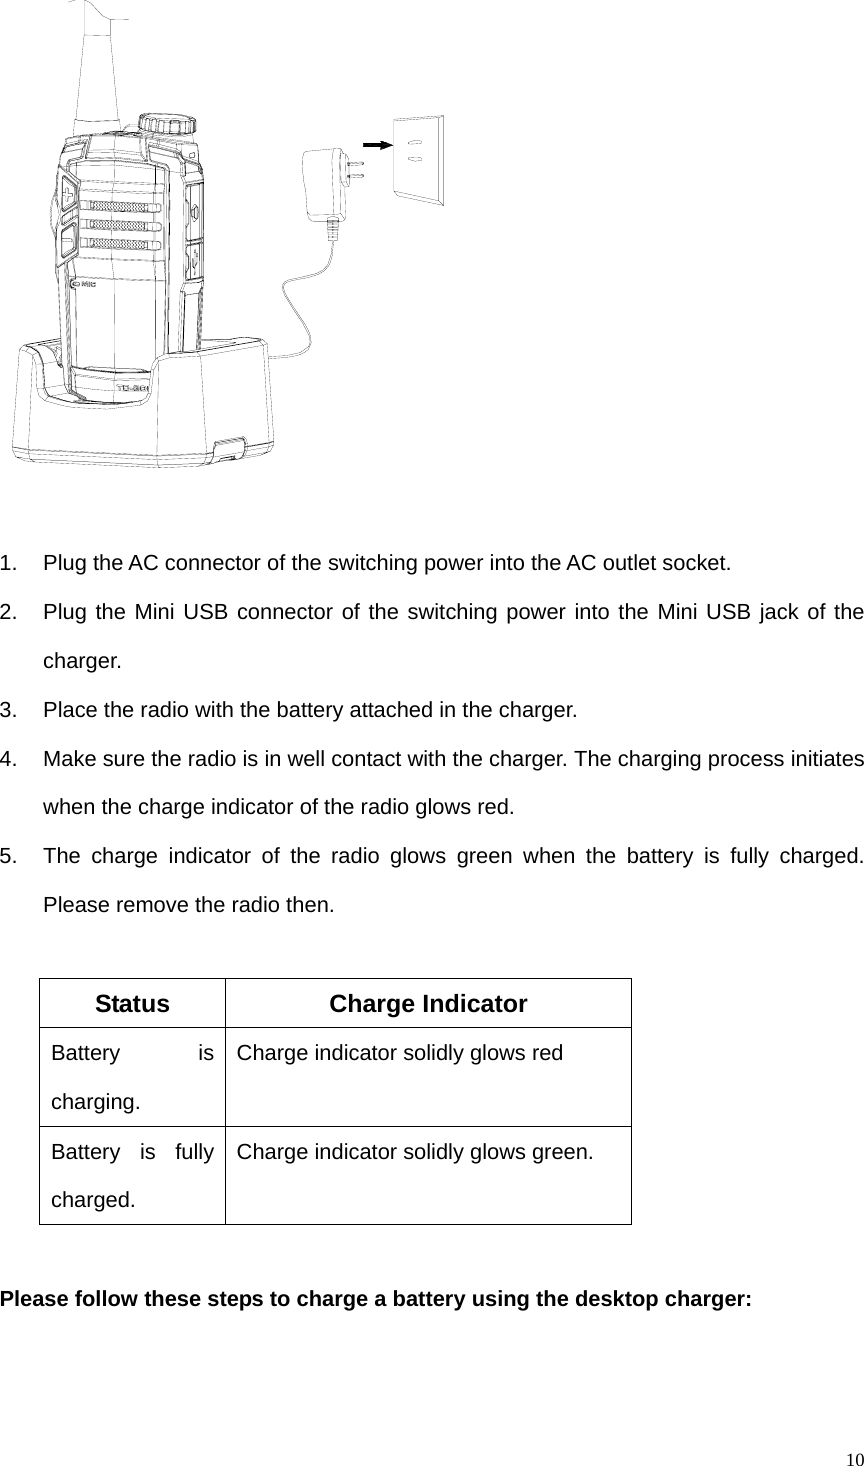   10  1.  Plug the AC connector of the switching power into the AC outlet socket. 2.  Plug the Mini USB connector of the switching power into the Mini USB jack of the charger. 3.  Place the radio with the battery attached in the charger. 4.  Make sure the radio is in well contact with the charger. The charging process initiates when the charge indicator of the radio glows red. 5.  The charge indicator of the radio glows green when the battery is fully charged. Please remove the radio then.    Status Charge Indicator Battery is charging. Charge indicator solidly glows red   Battery is fully charged. Charge indicator solidly glows green.    Please follow these steps to charge a battery using the desktop charger: 